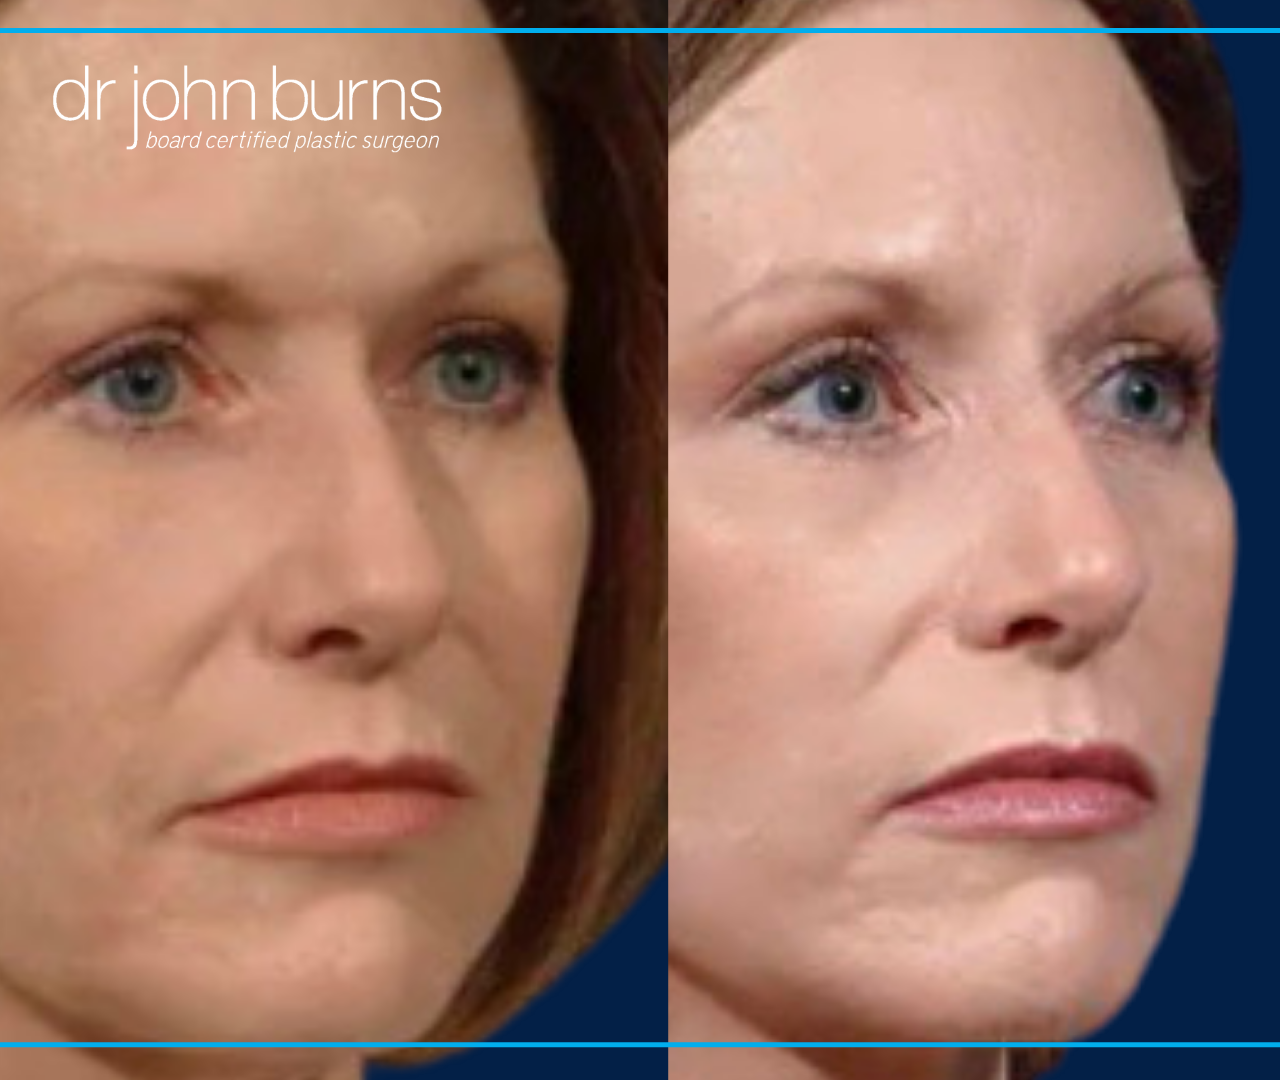 45 Degree View | Before and After Female Rhinoplasty by Dr. John Burns